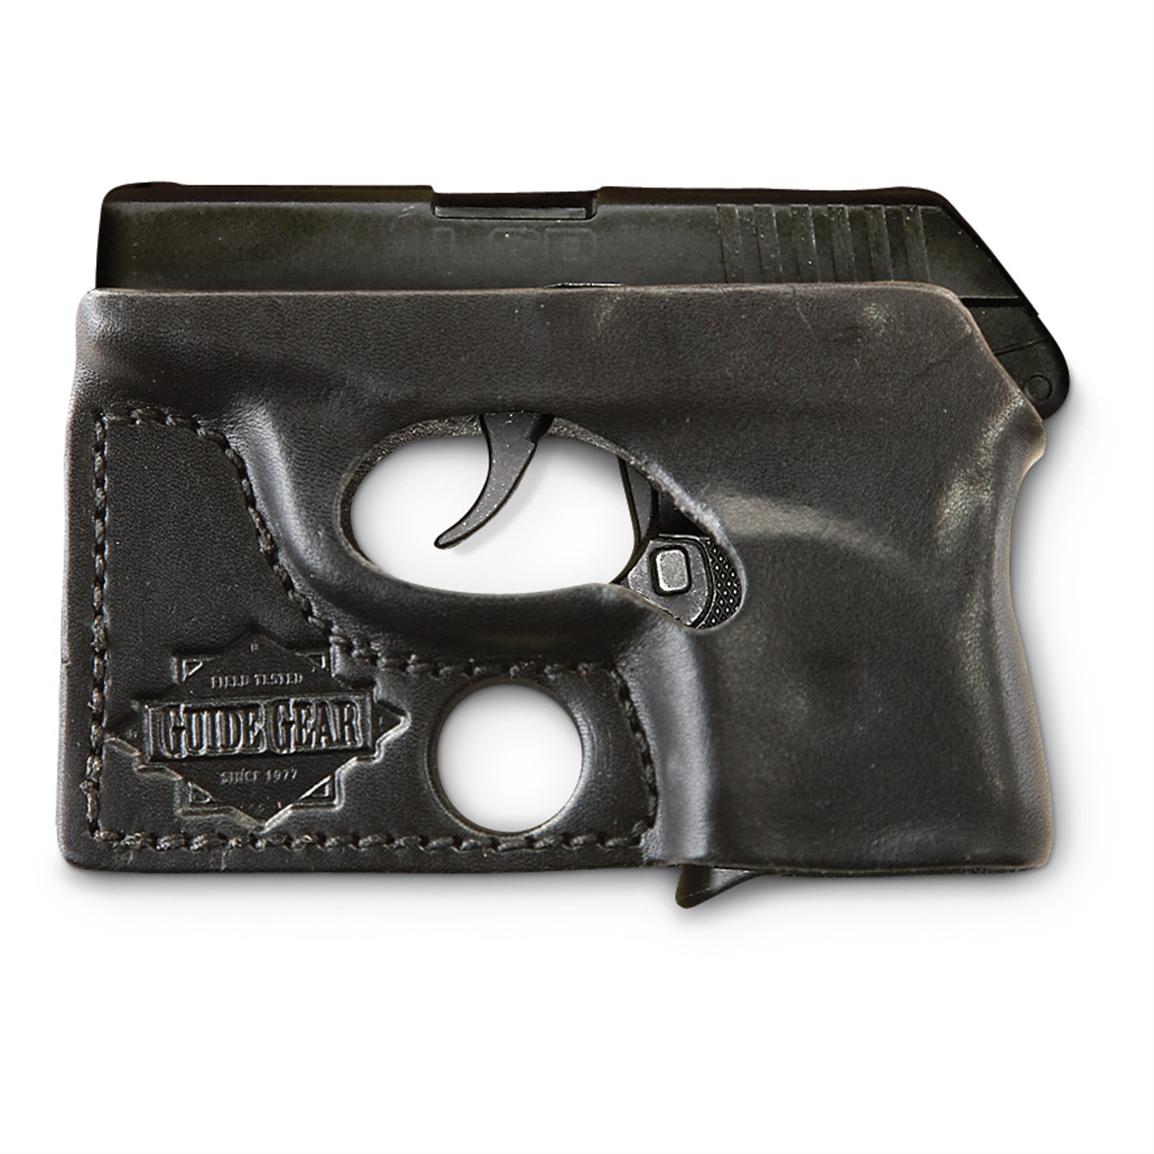 Guide Gear Leather Pistol Holster Ruger Lcp Holsters At Sportsman S Guide